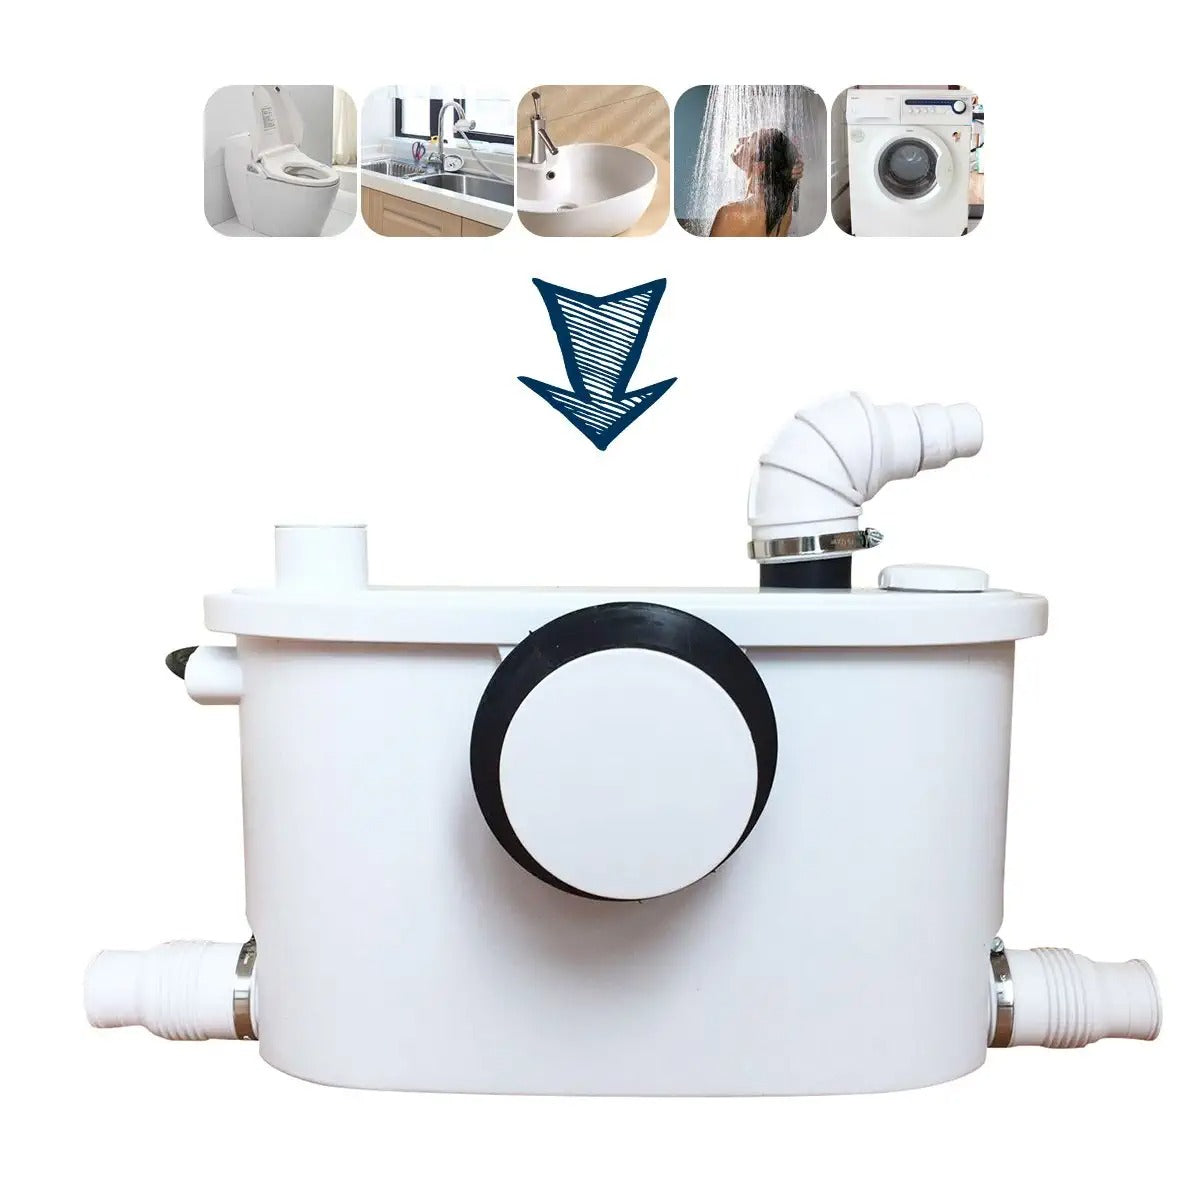 Two Piece Toilet with 700W Macerator Pump for Upflush Toilet System and 4  Water Inlets Connect Full Bathroom, Sink, Toilet, Water Disposal, Automatic